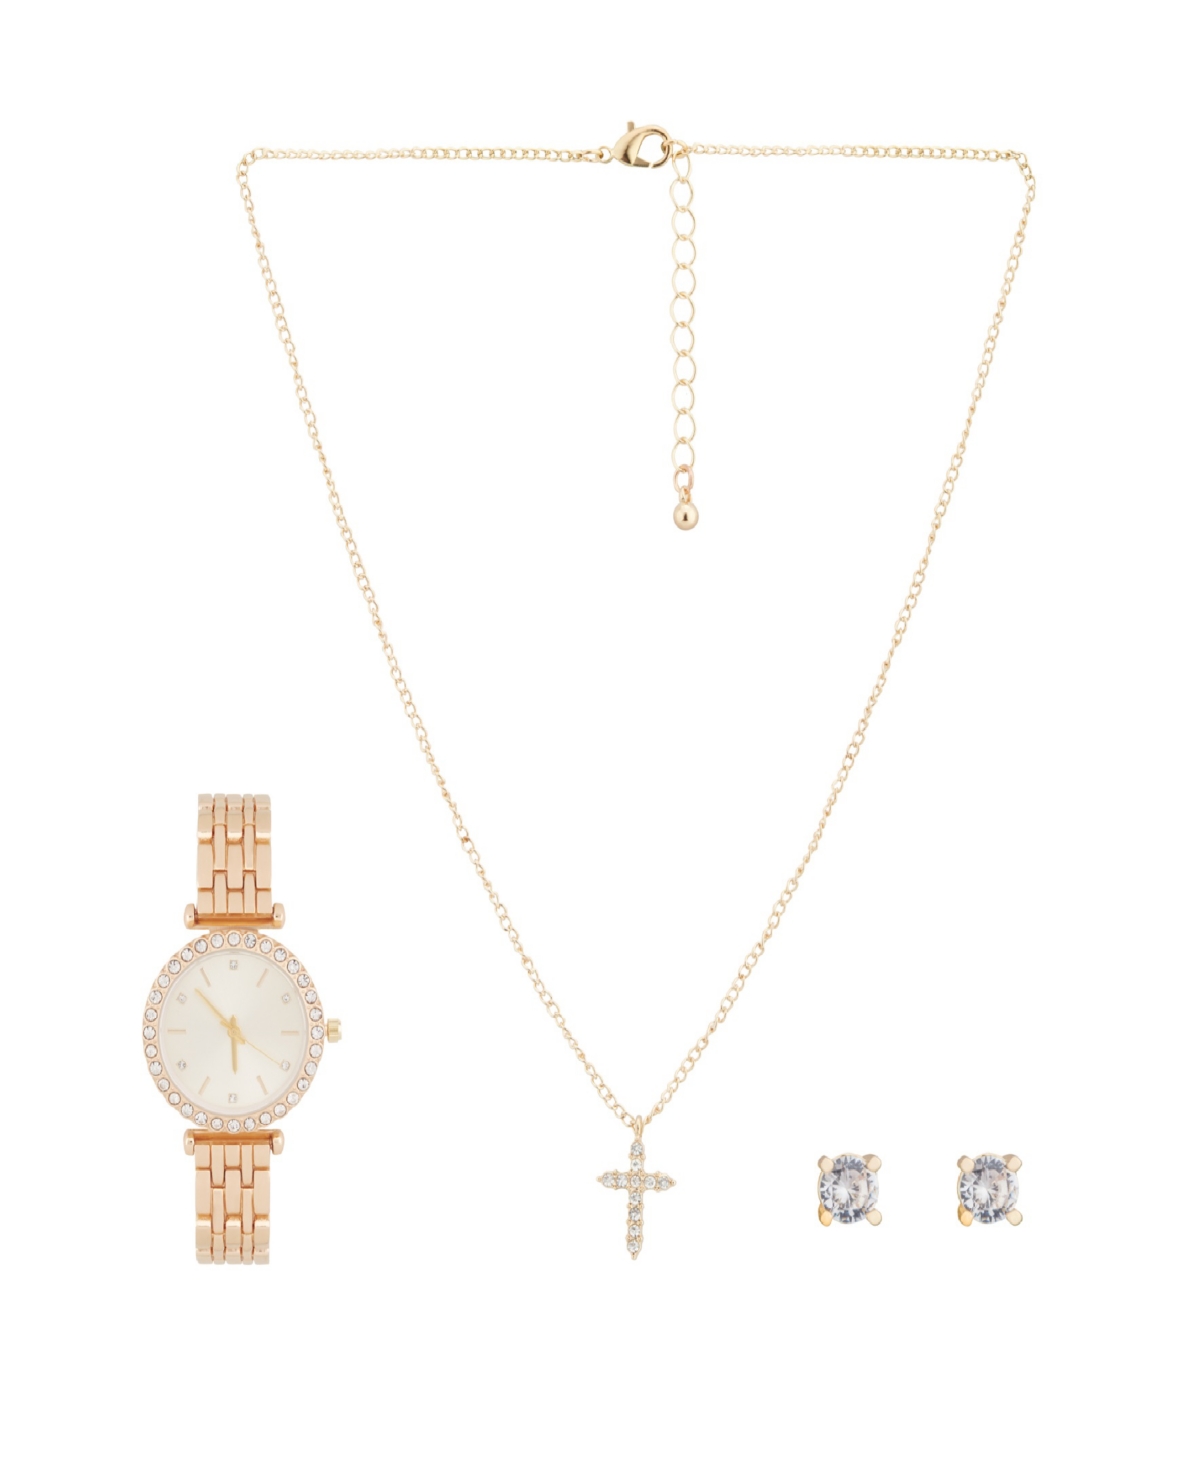 Women's Analog Shiny Gold-Tone Metal Bracelet Watch 34mm with Necklace Earring Set - Champagne, Gold